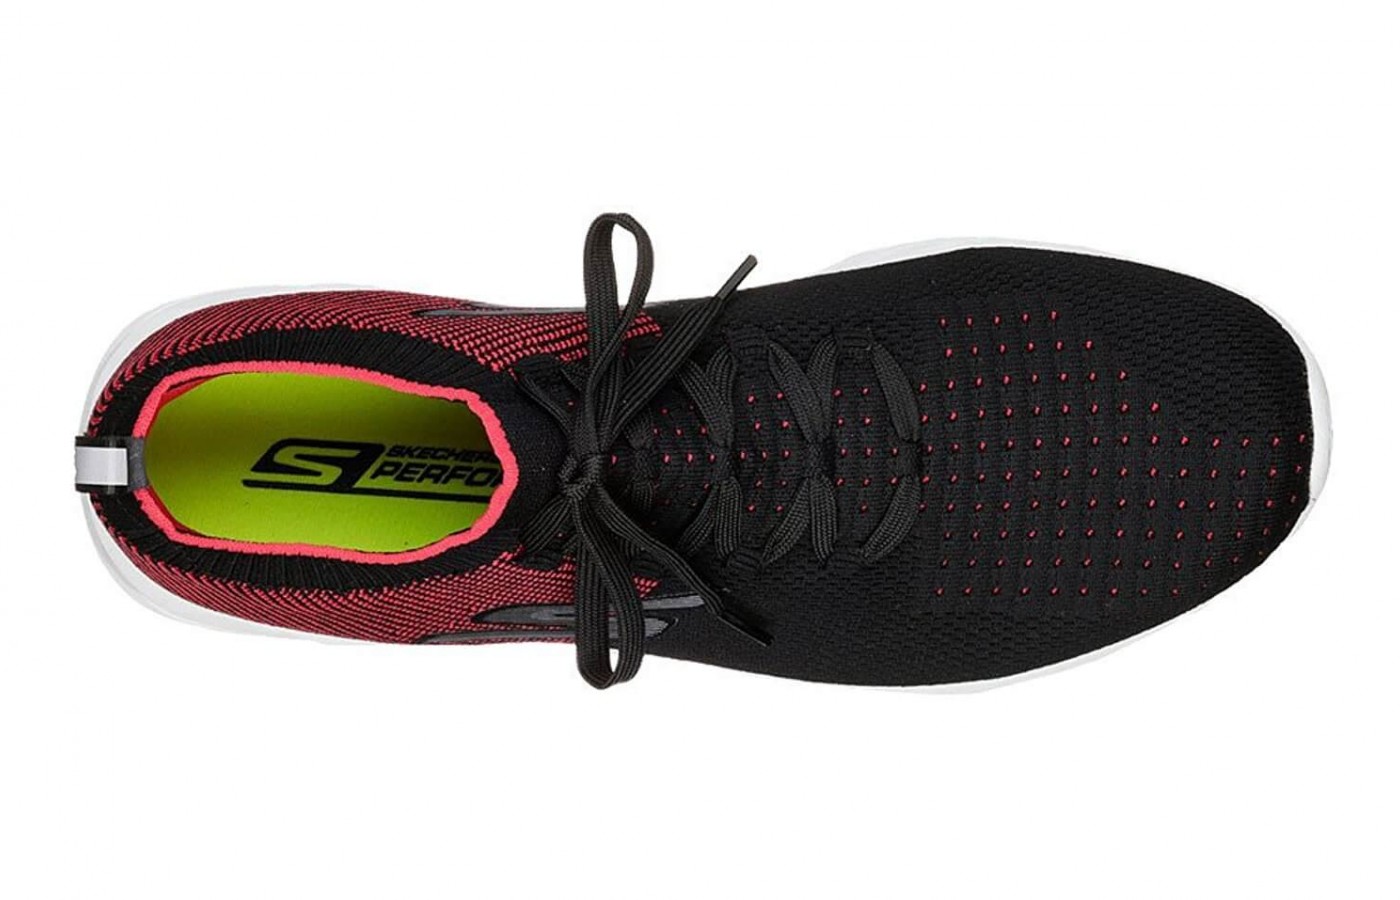 The Skechers GoRun 6 features a heel pull tab at the rear